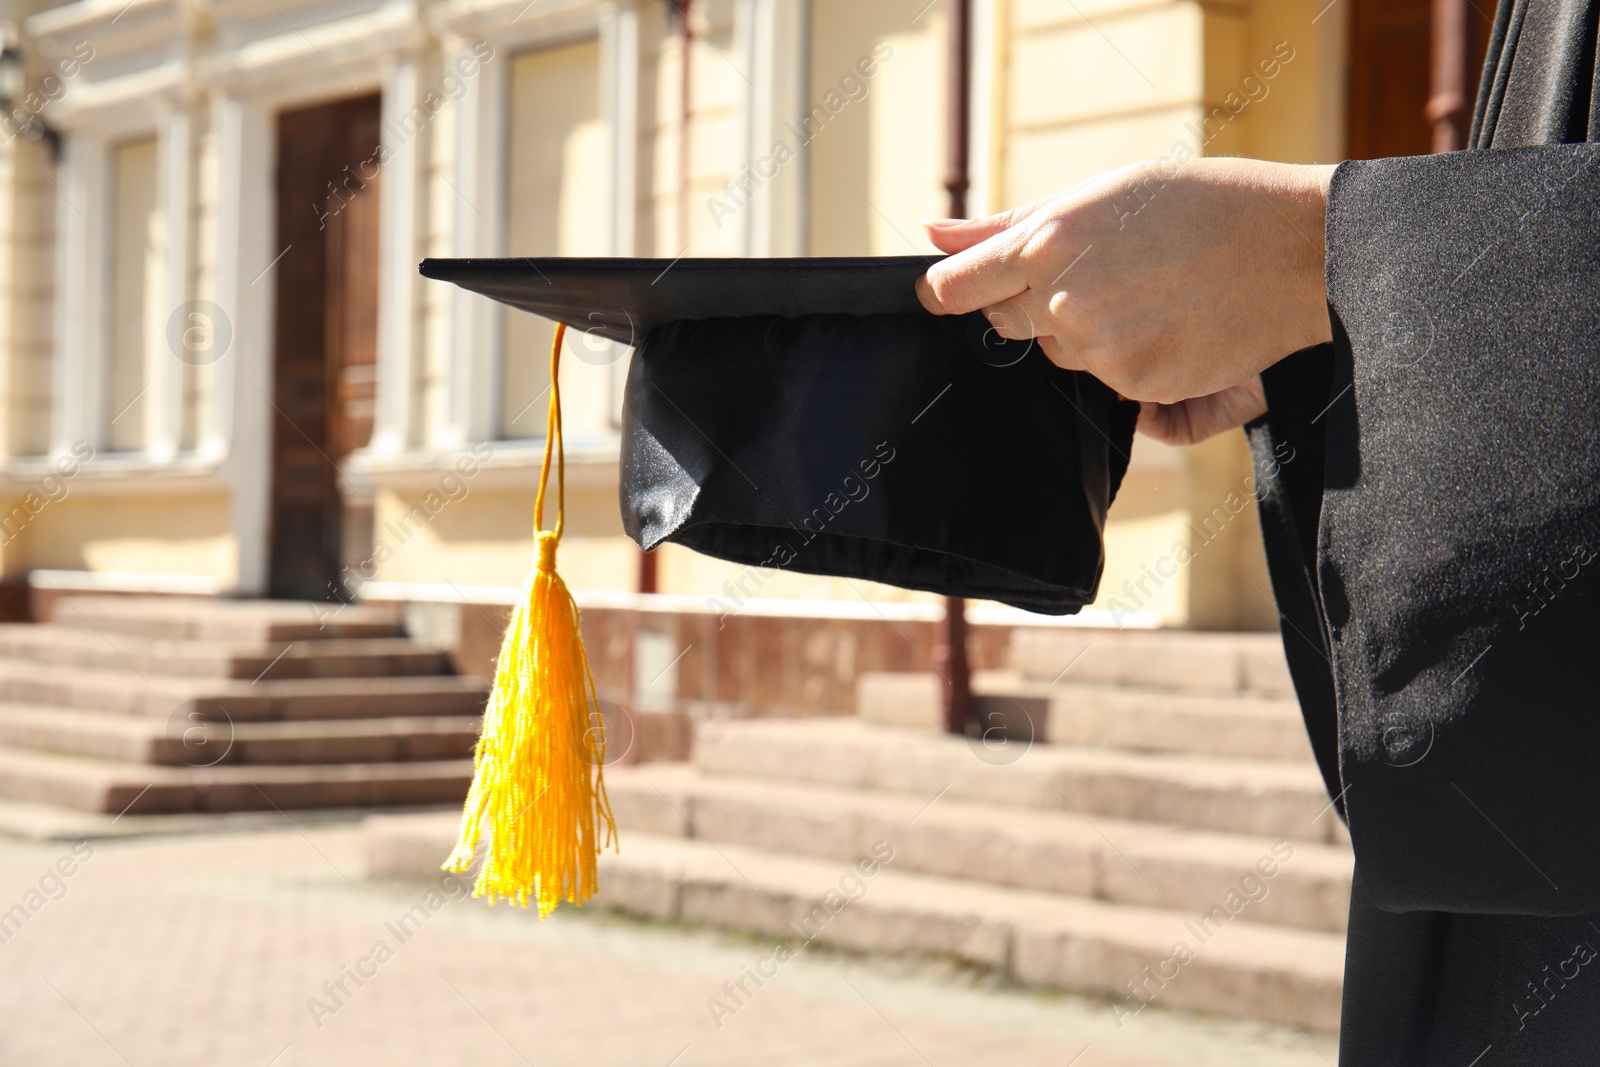 Photo of Student with graduation hat outdoors on sunny day, closeup